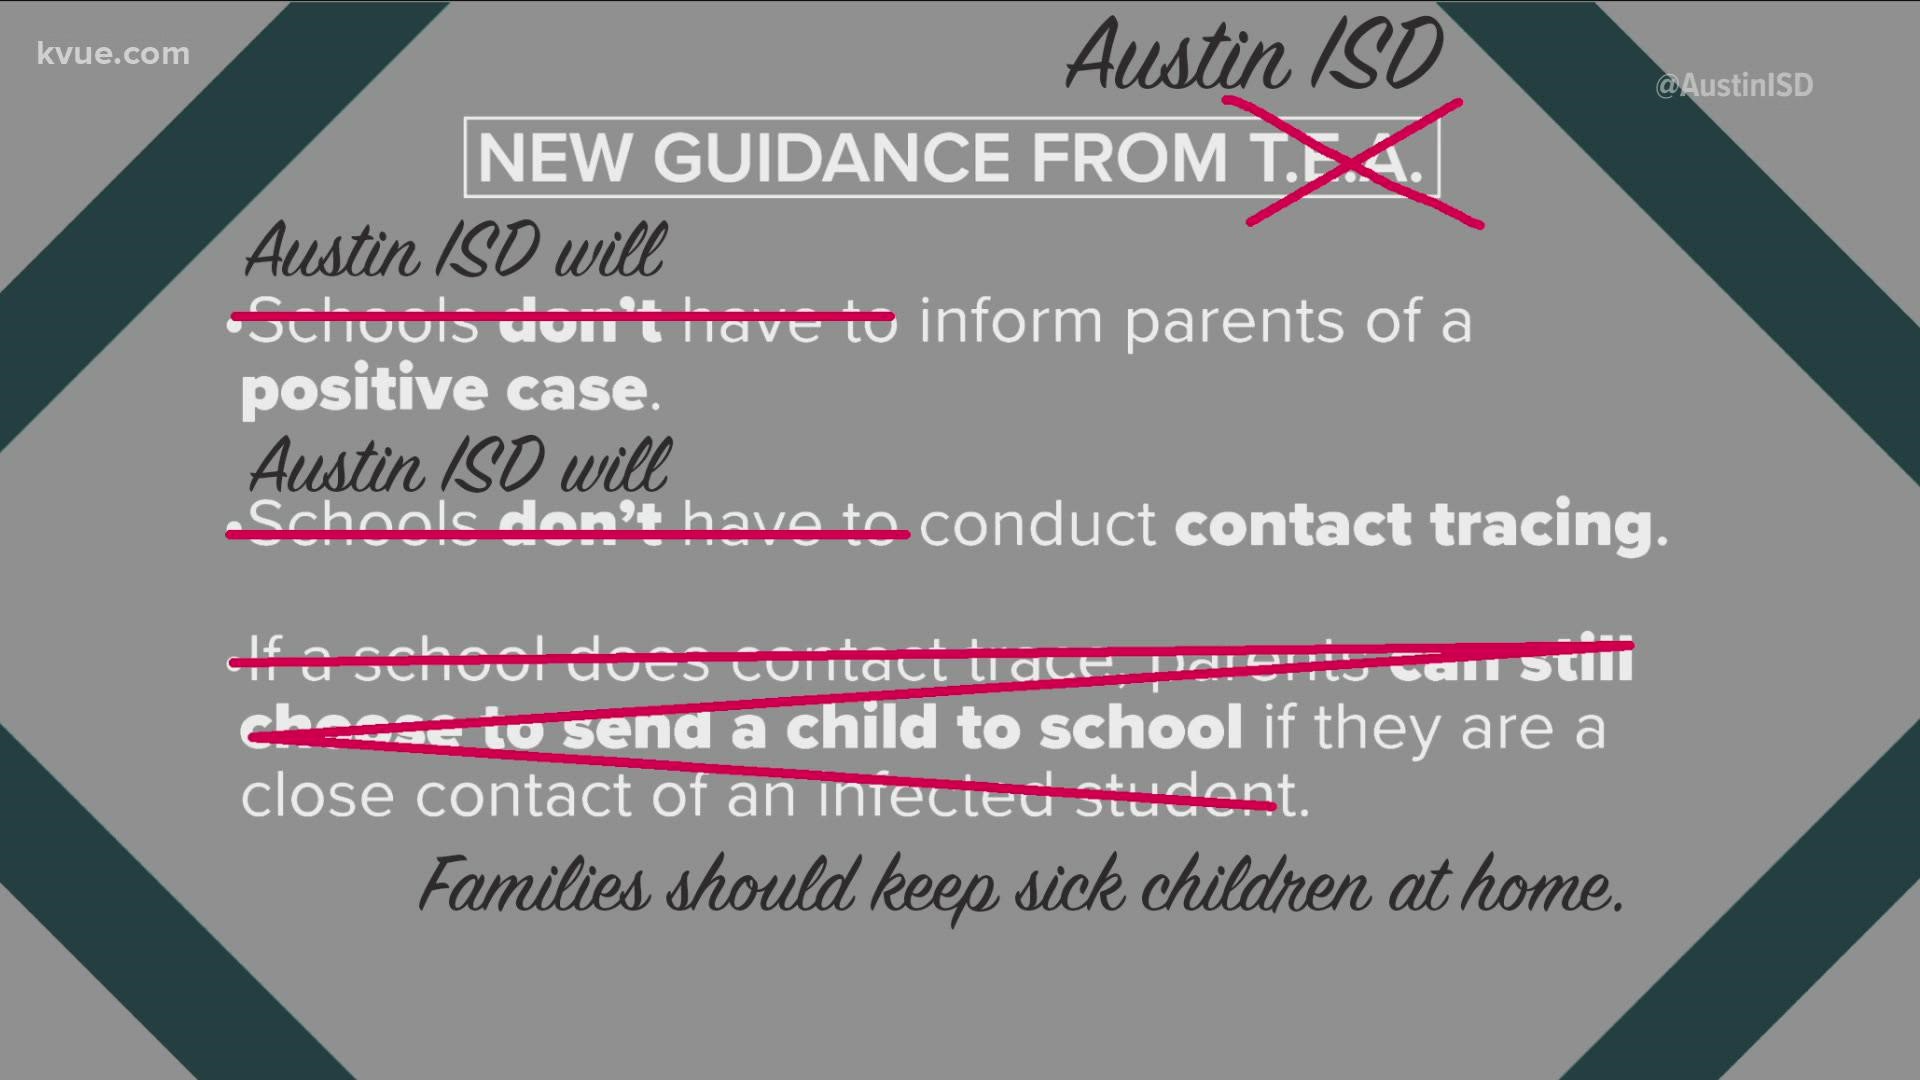 Austin ISD says it will continue contact tracing and informing parents when positive cases occur.